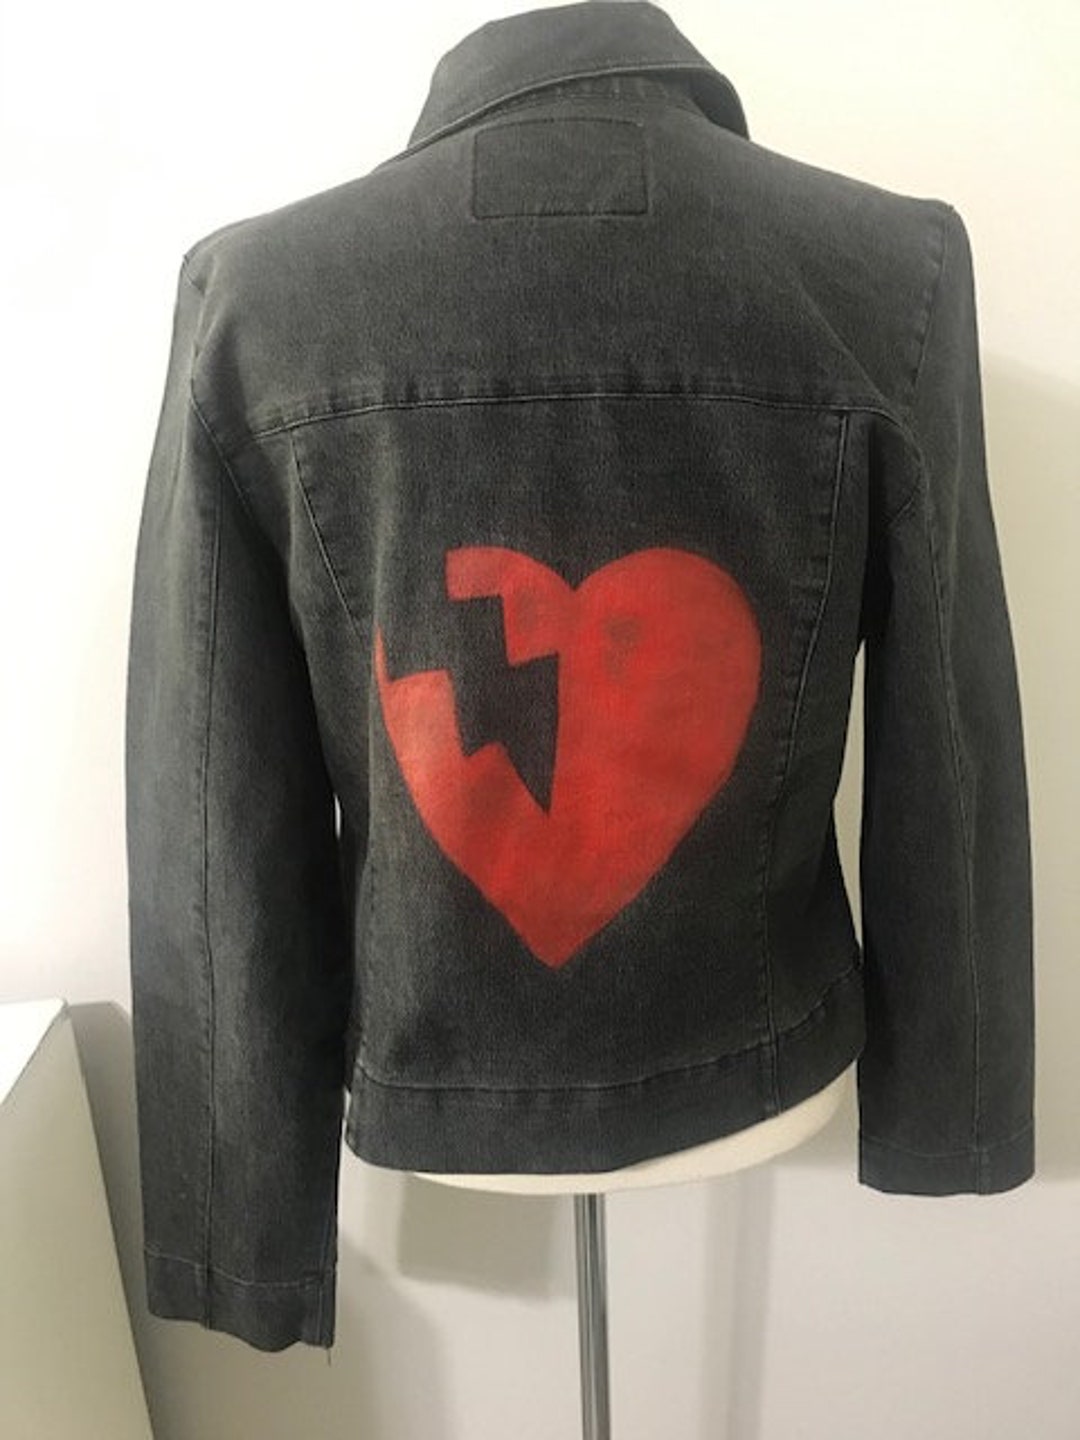 GUESS Denim Grey Jacket, Hand Painted Red Heart, Women's Casual Jacket ...